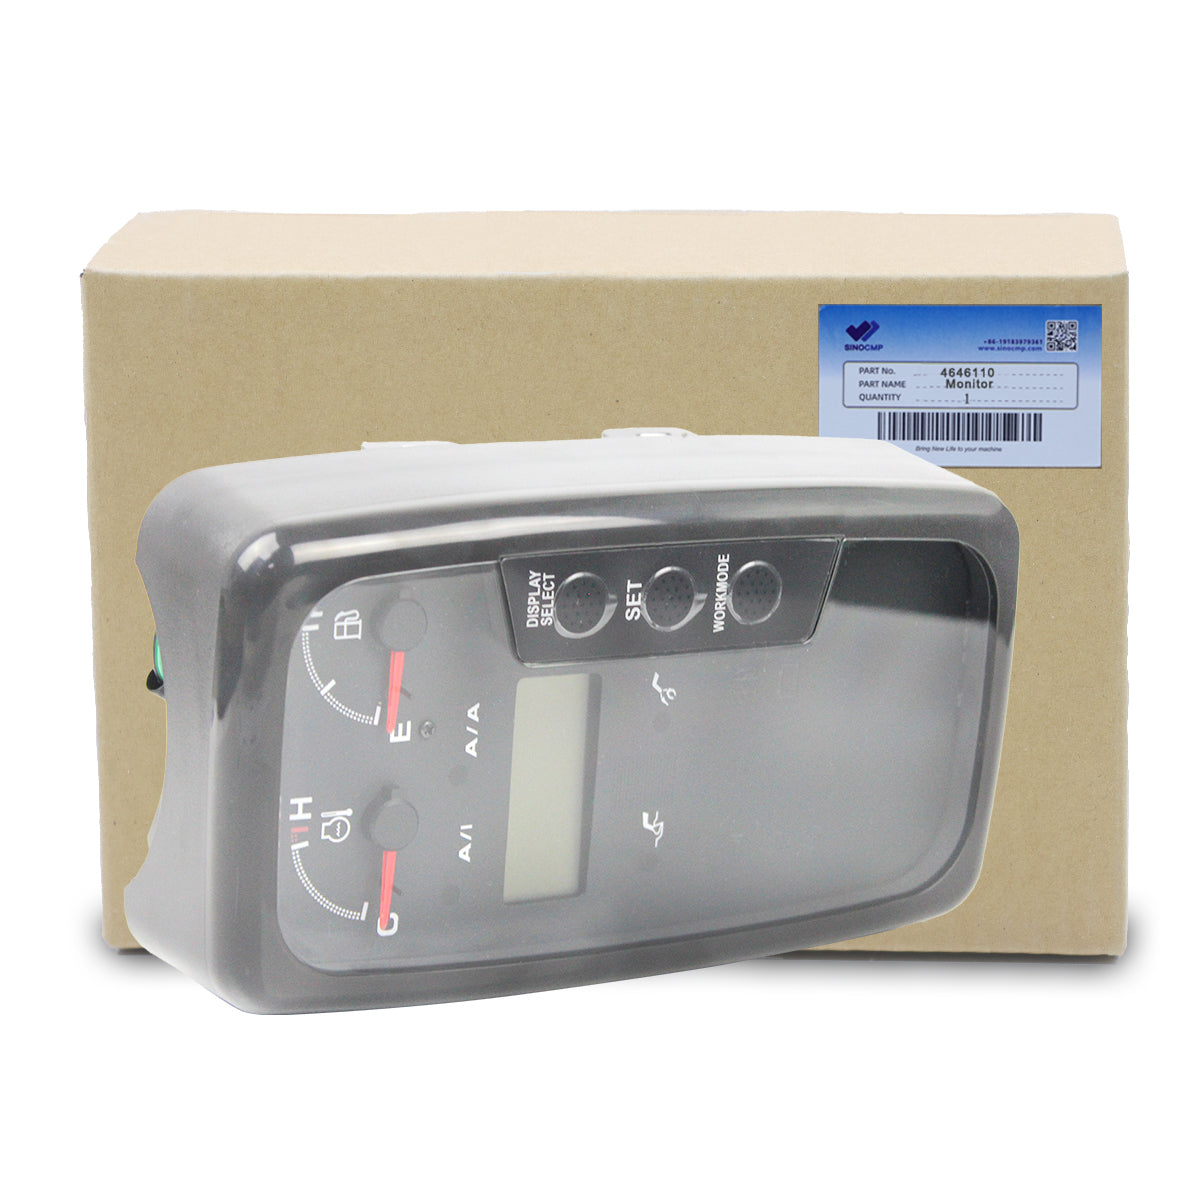 4646110 Monitor Display Panel for Hitachi Excavator ZX200 ZX200-E